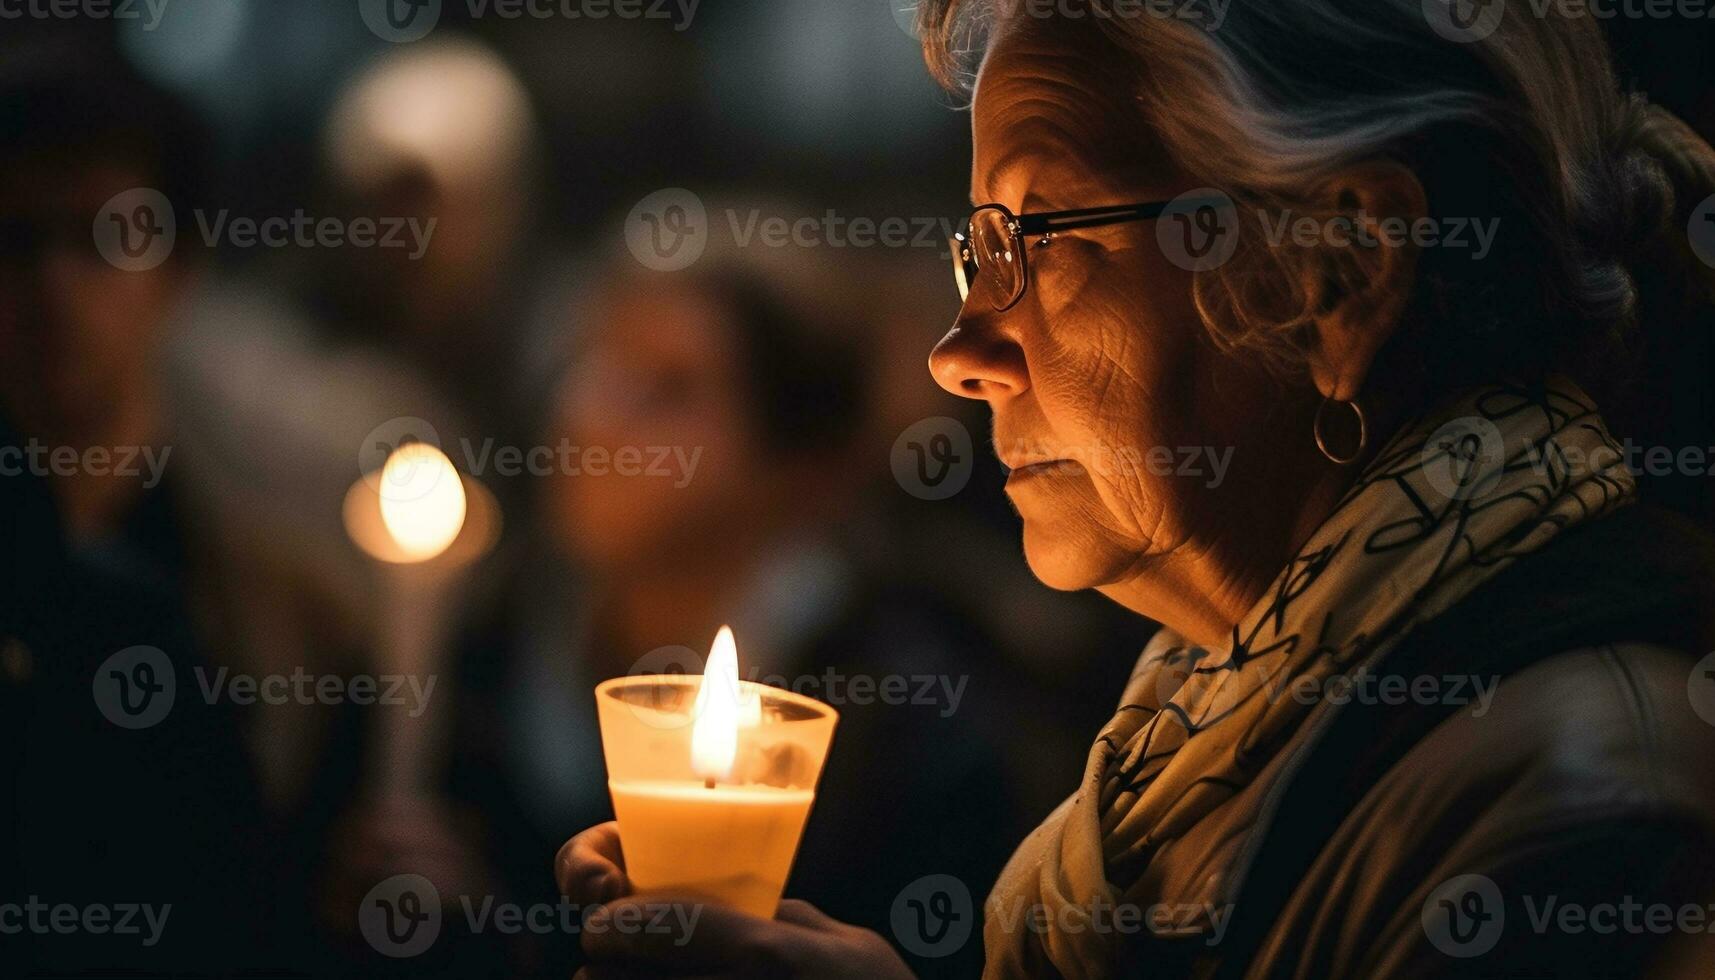 Praying adult holding candle, illuminated by flame generated by AI photo